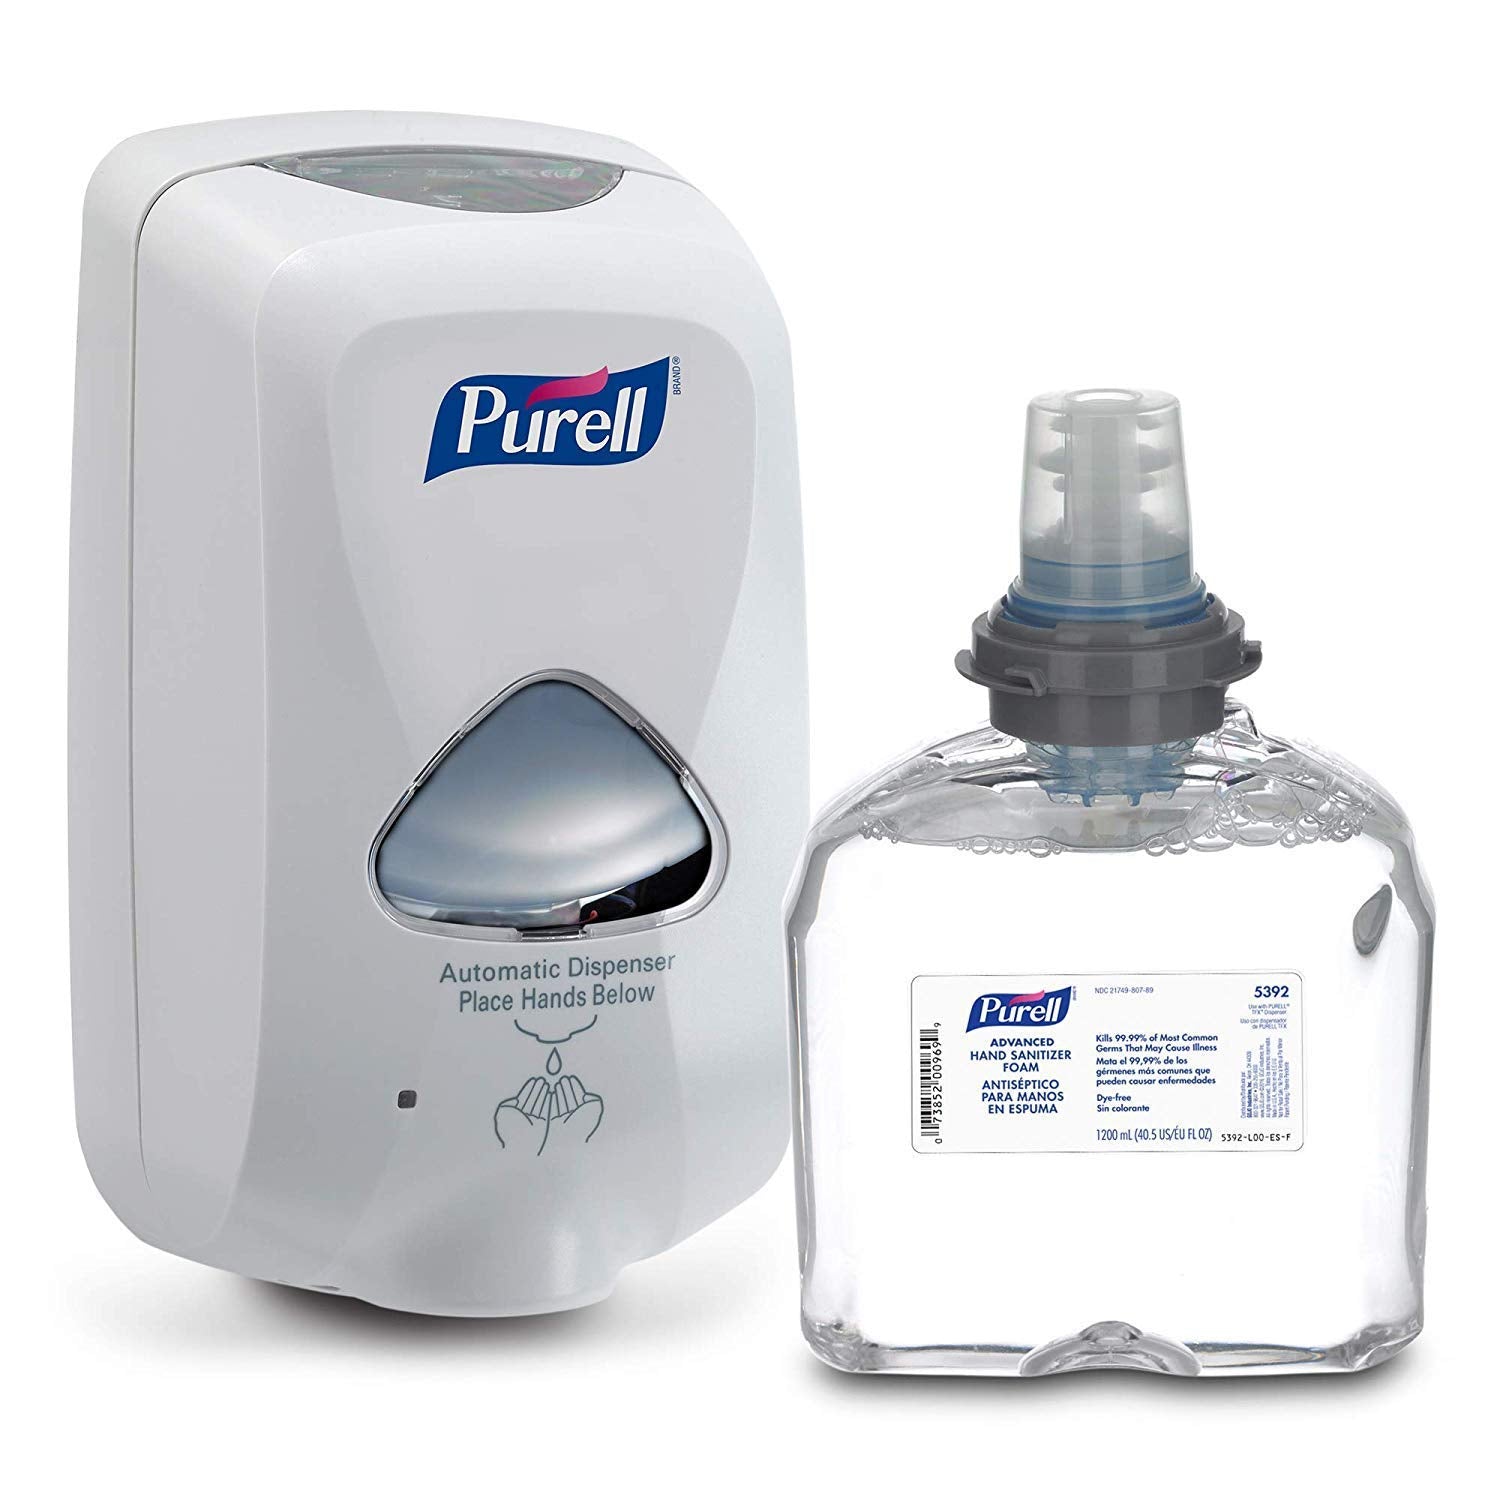 Purell TFX Touch Free Dispenser Kit with 1200 mL Refill